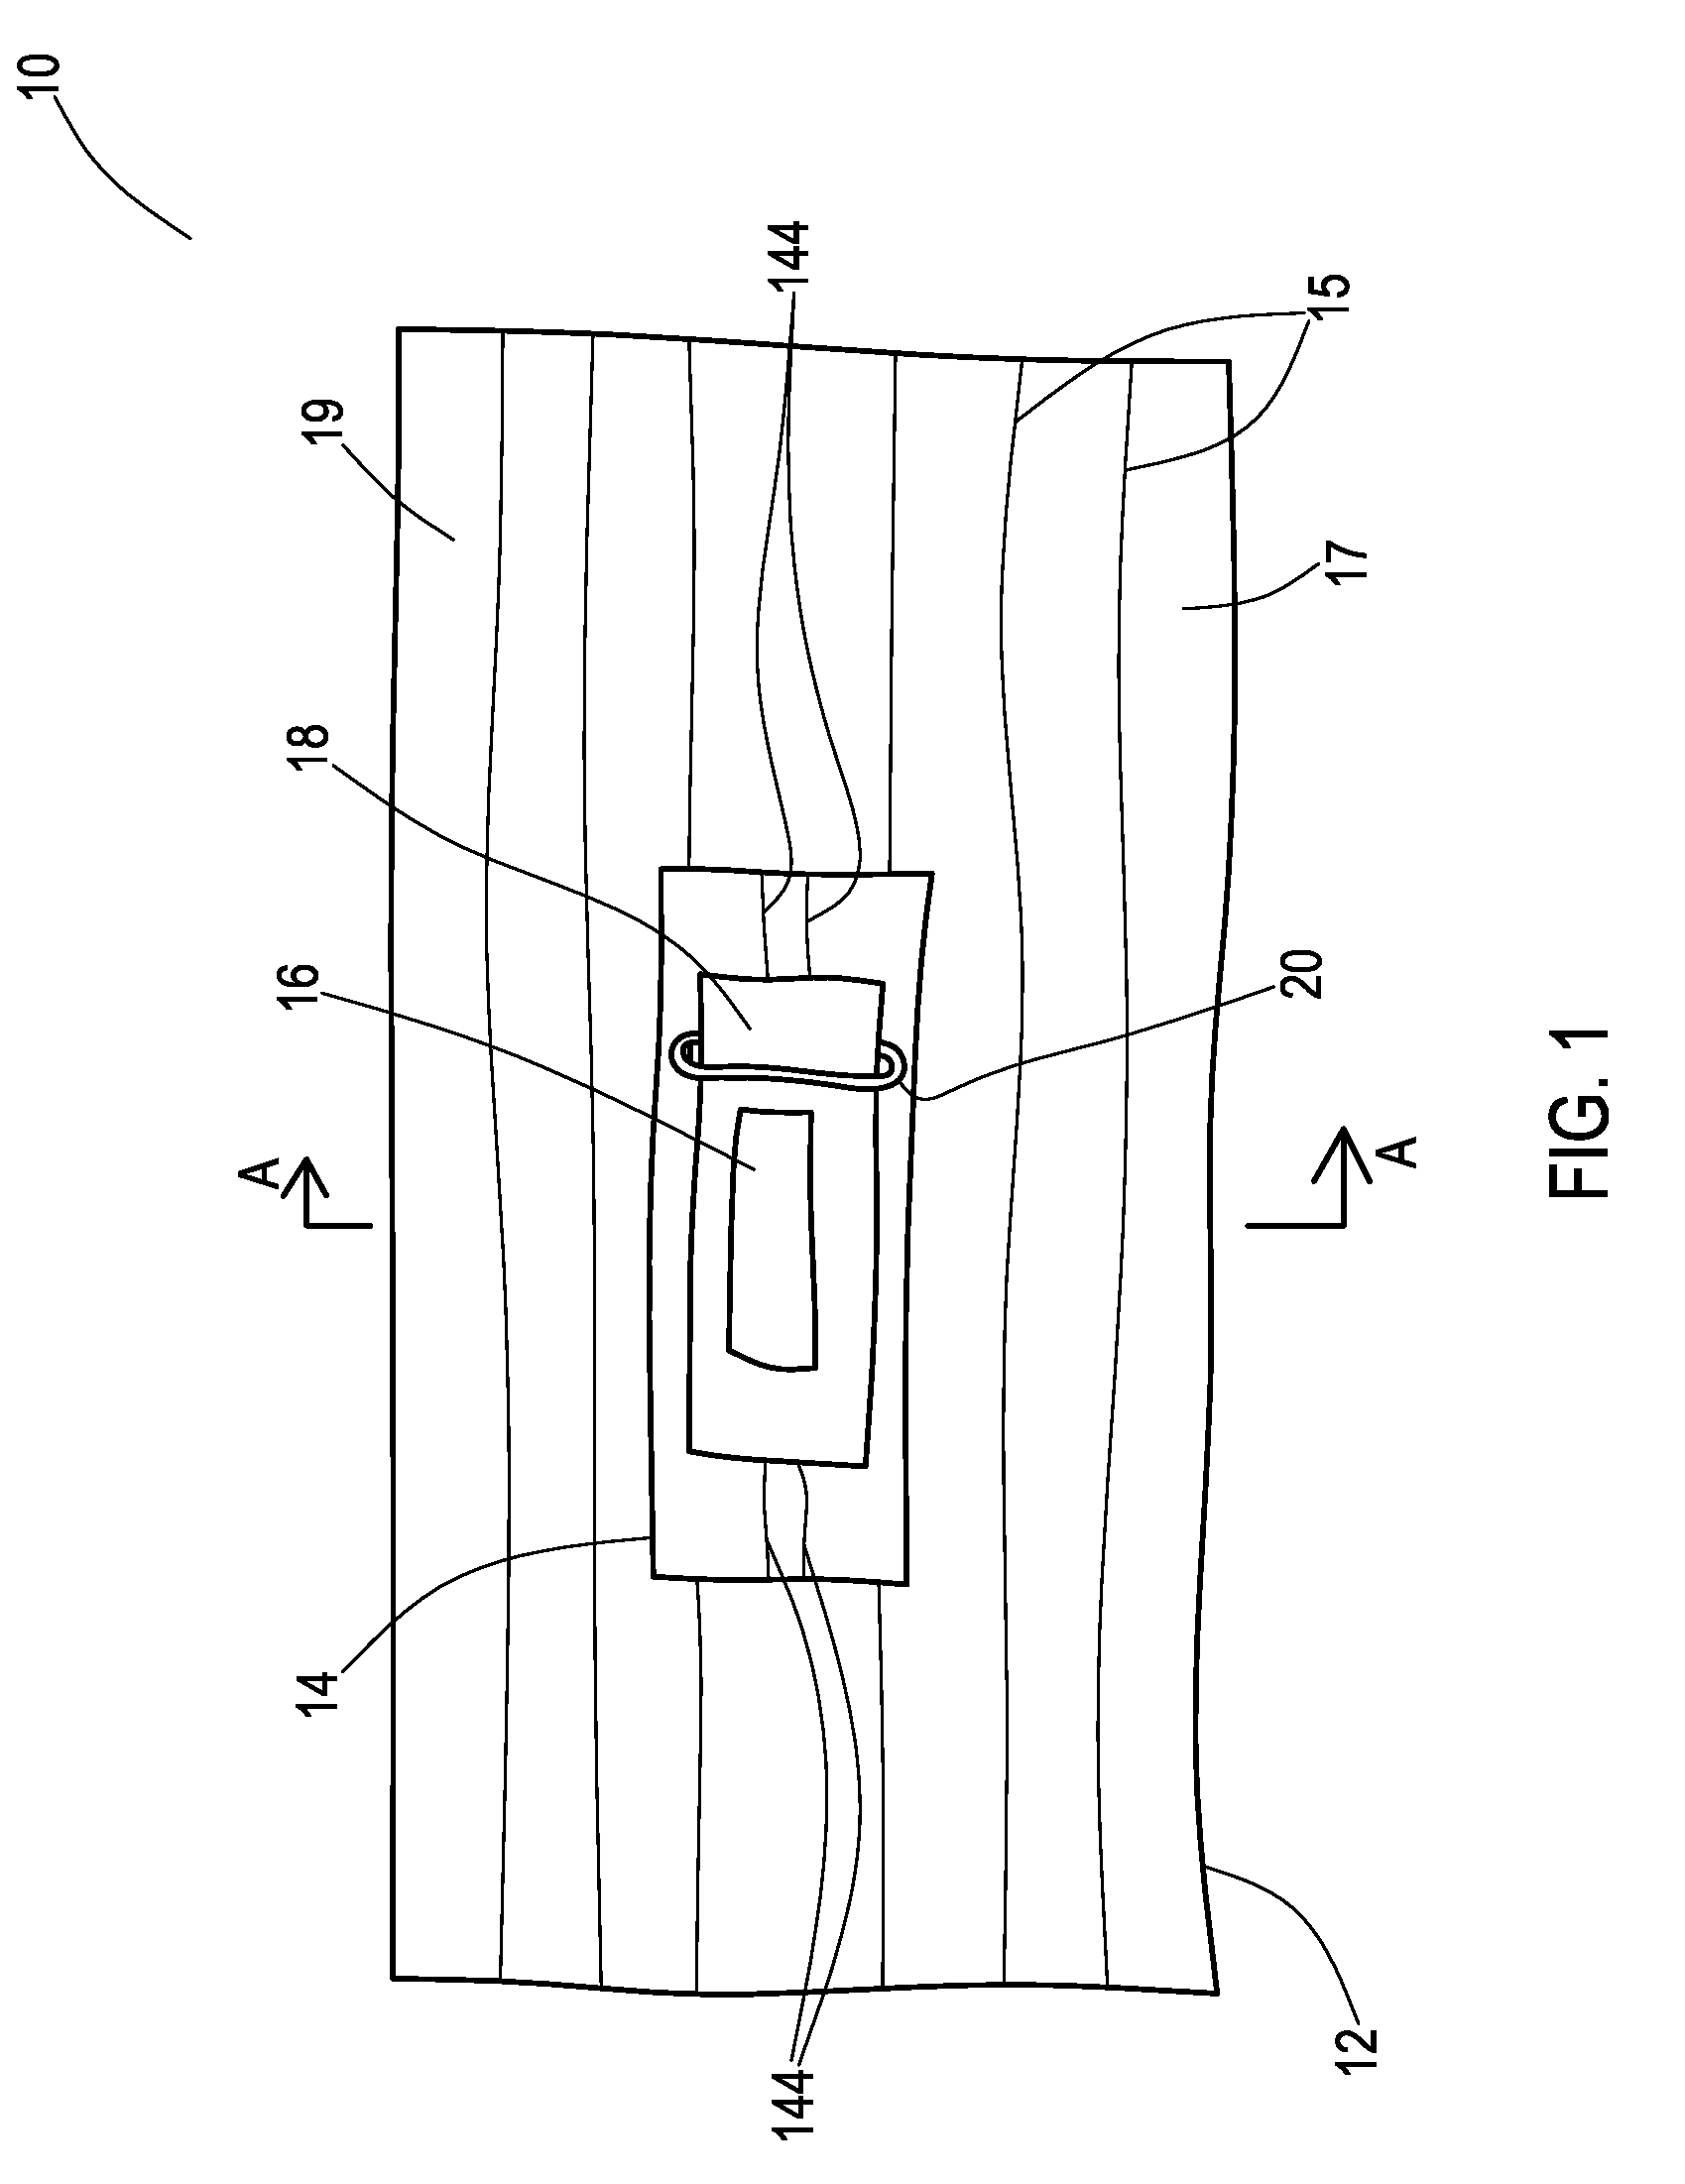 Integrated operating room sheet system and method for using the same